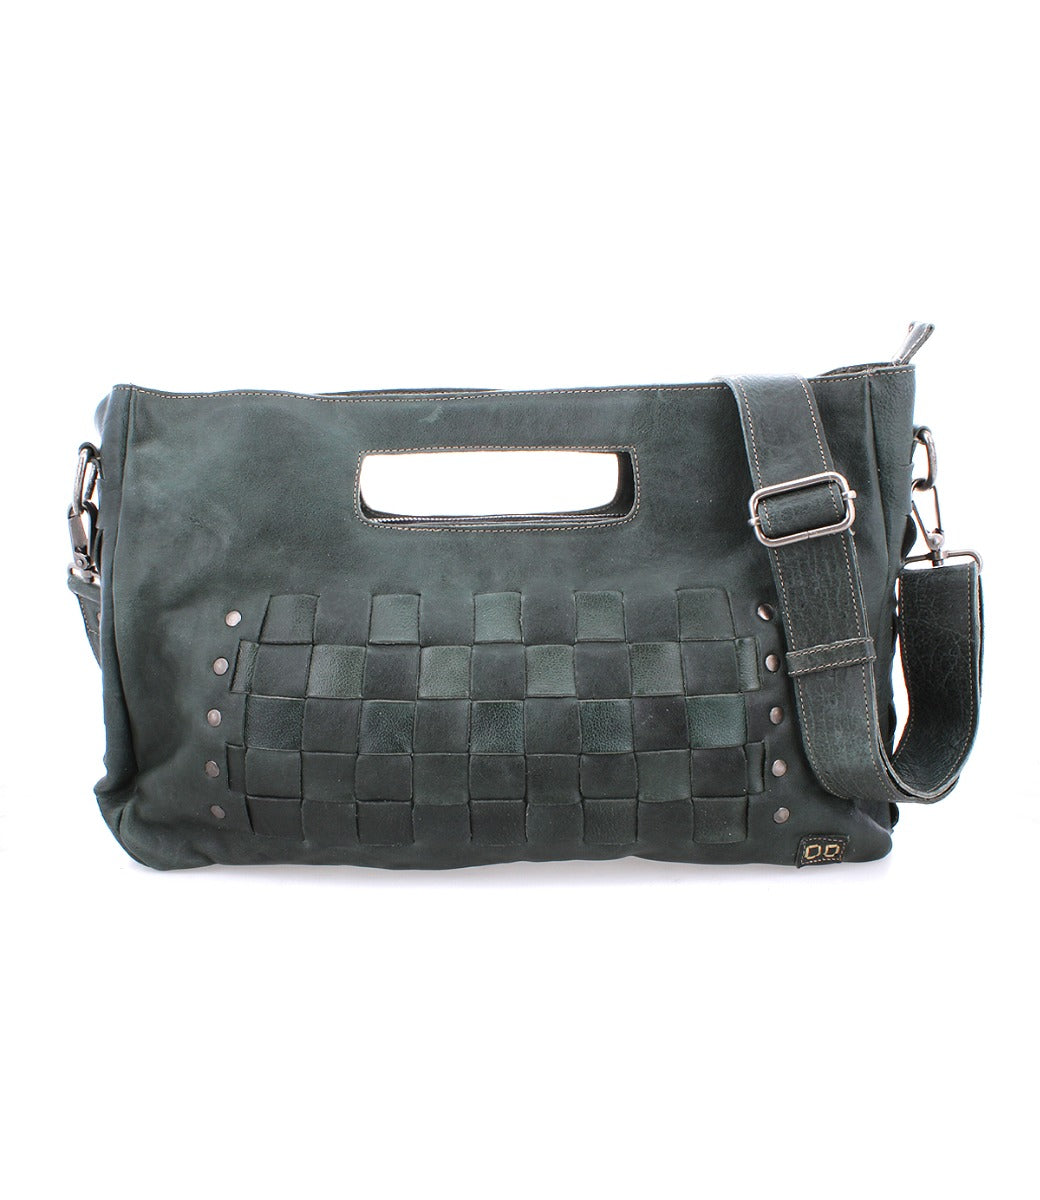 An Orchid L bag from Bed Stu, made of green leather with a strap and studs.